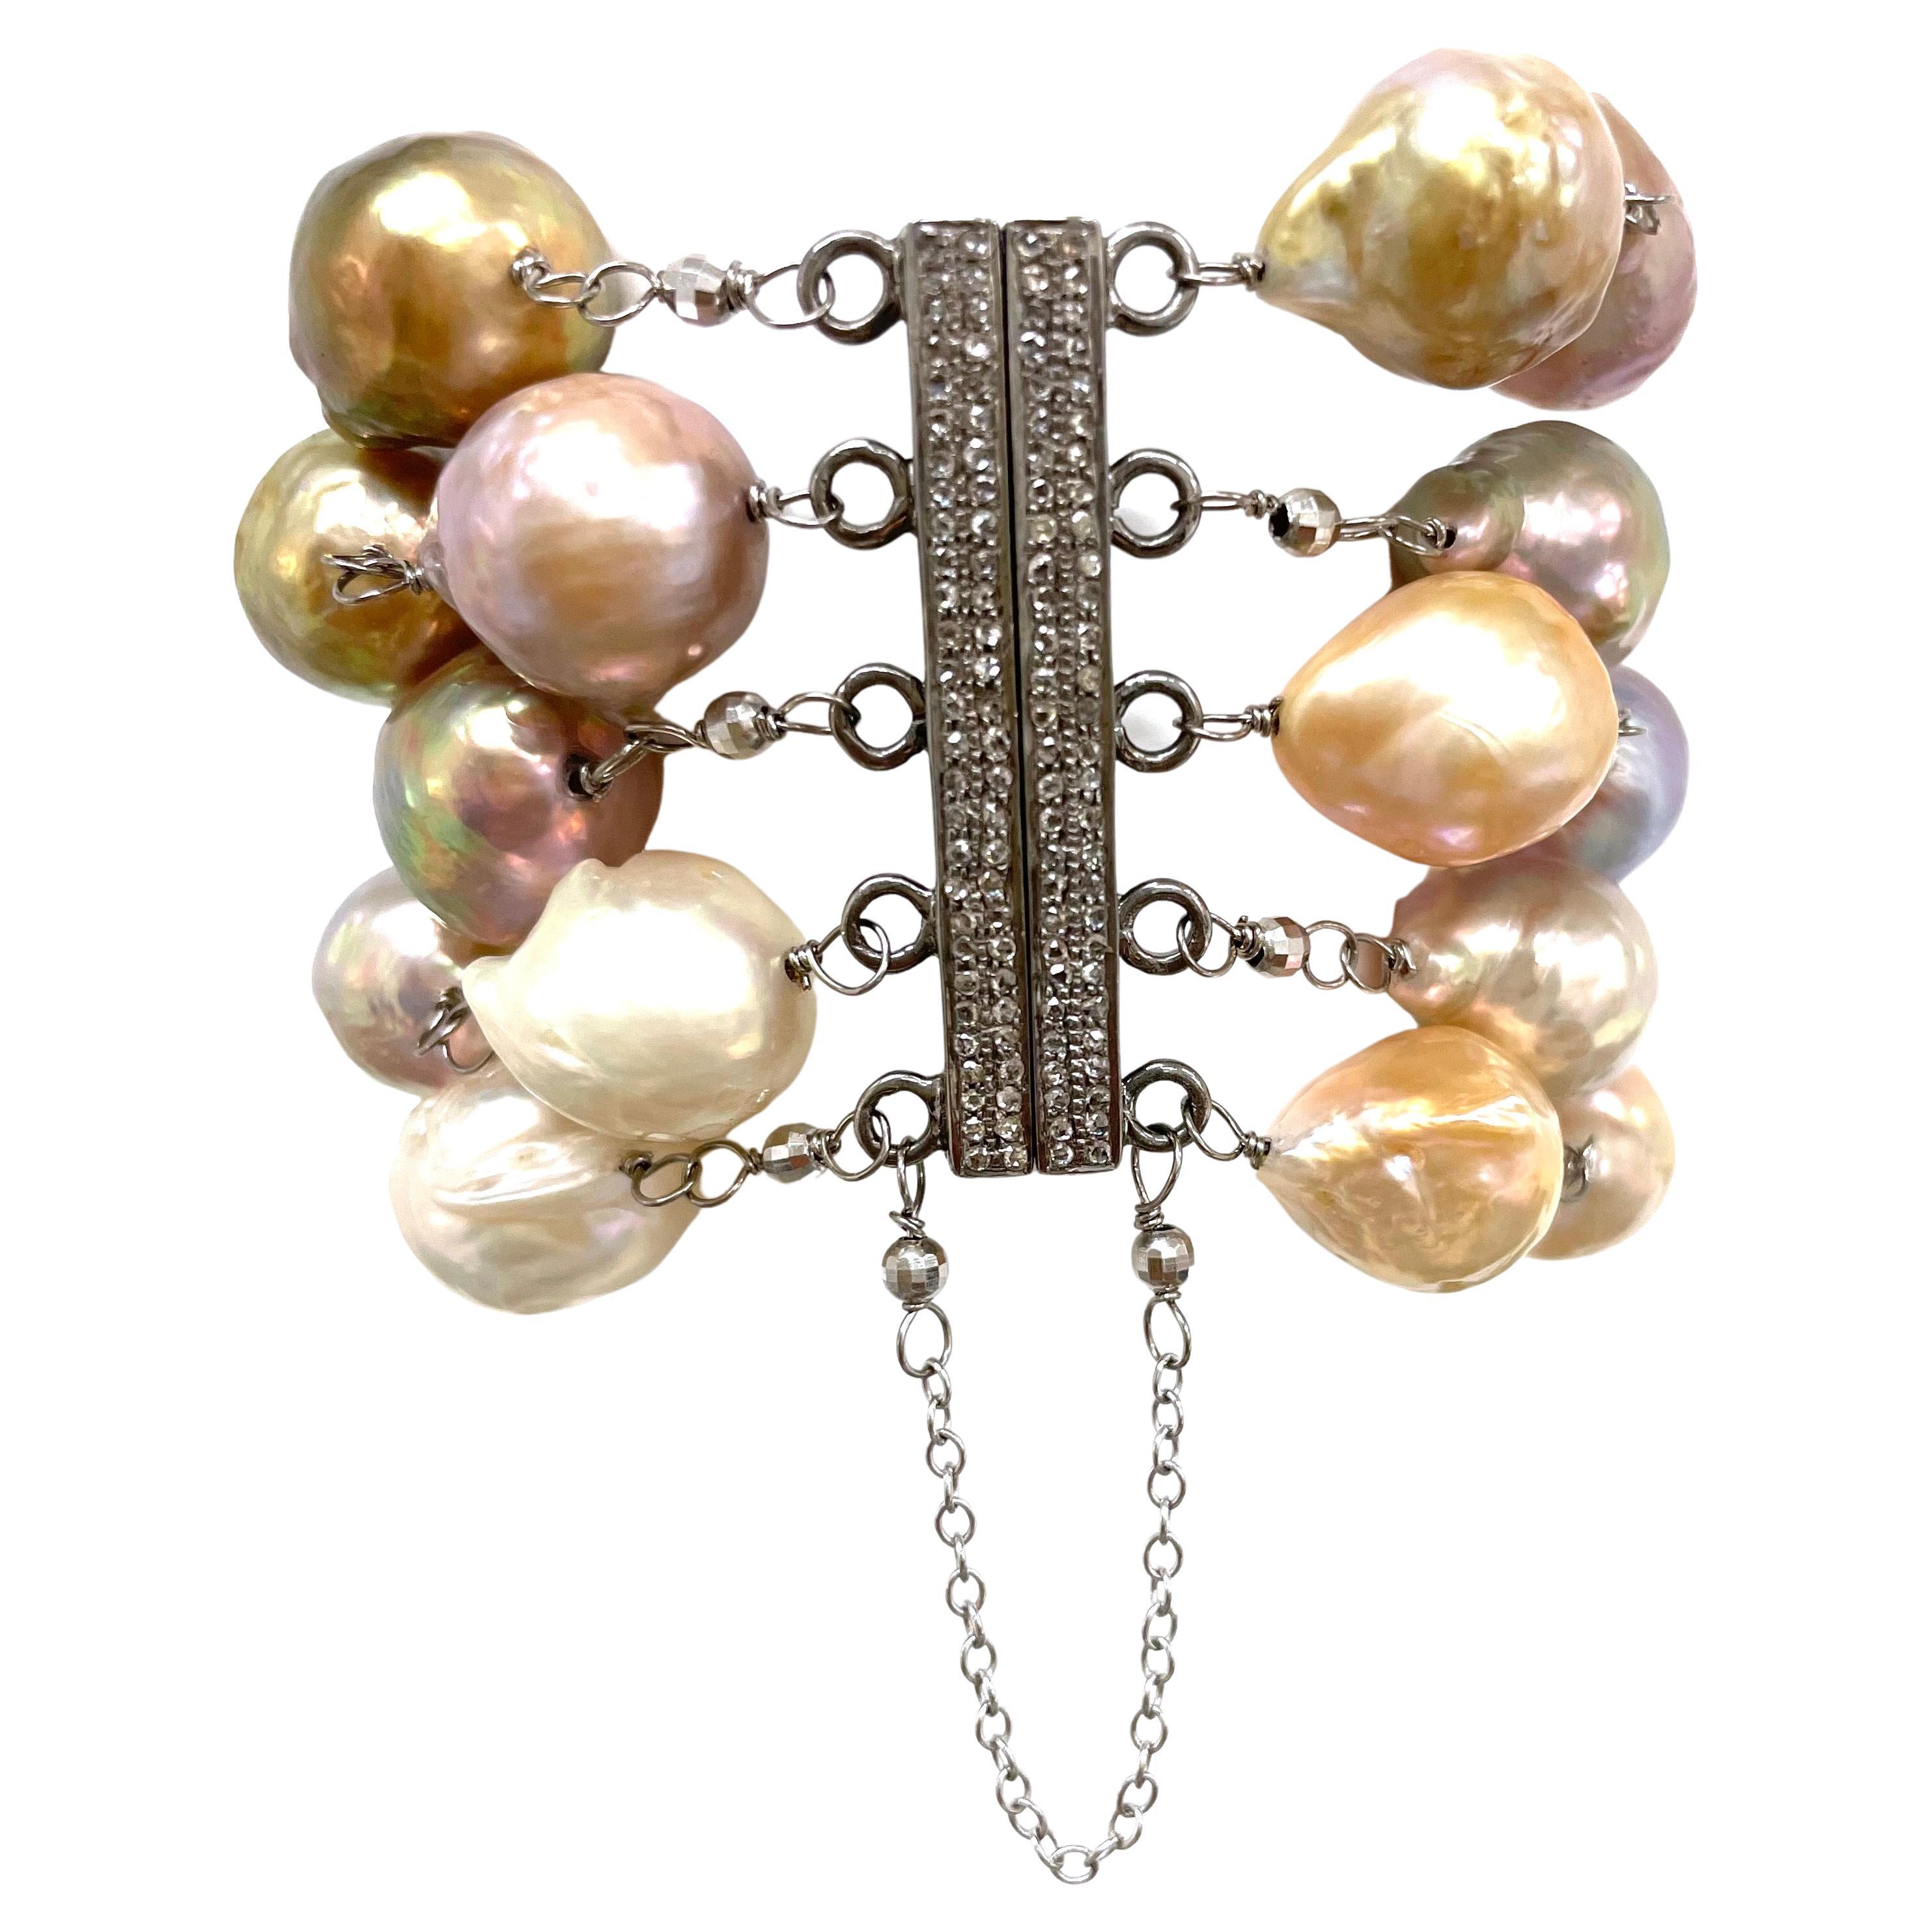 Large Pink Baroque Pearls with Diamond Clasp Paradizia Bracelet For Sale 7